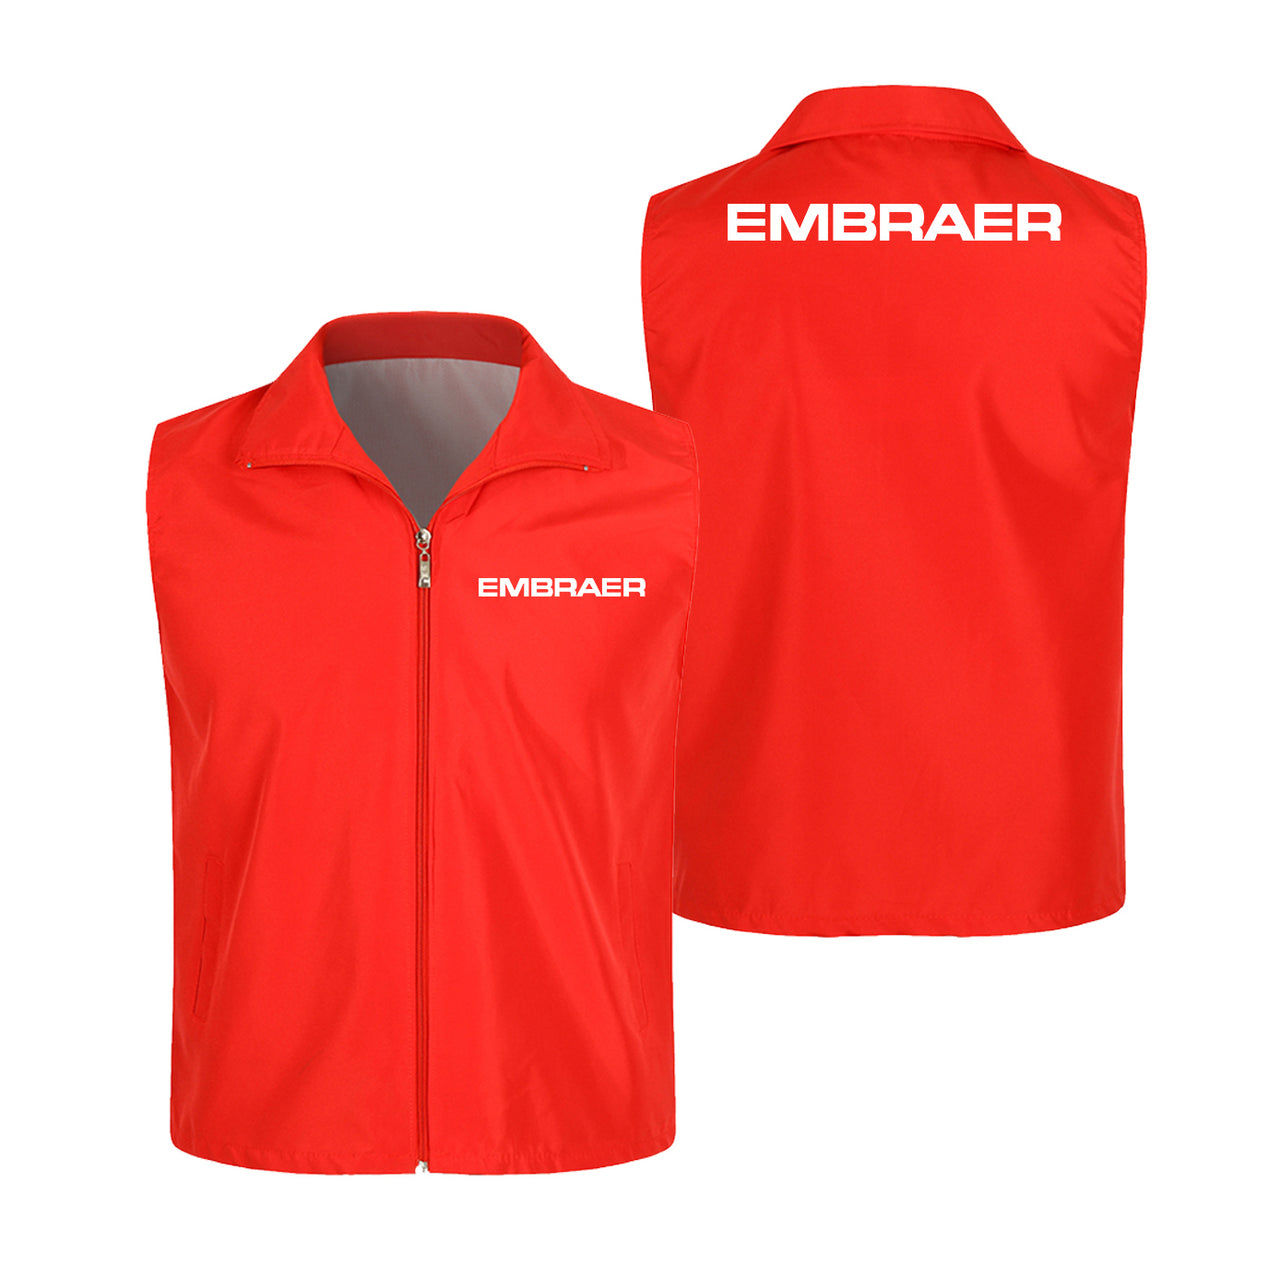 Embraer & Text Designed Thin Style Vests